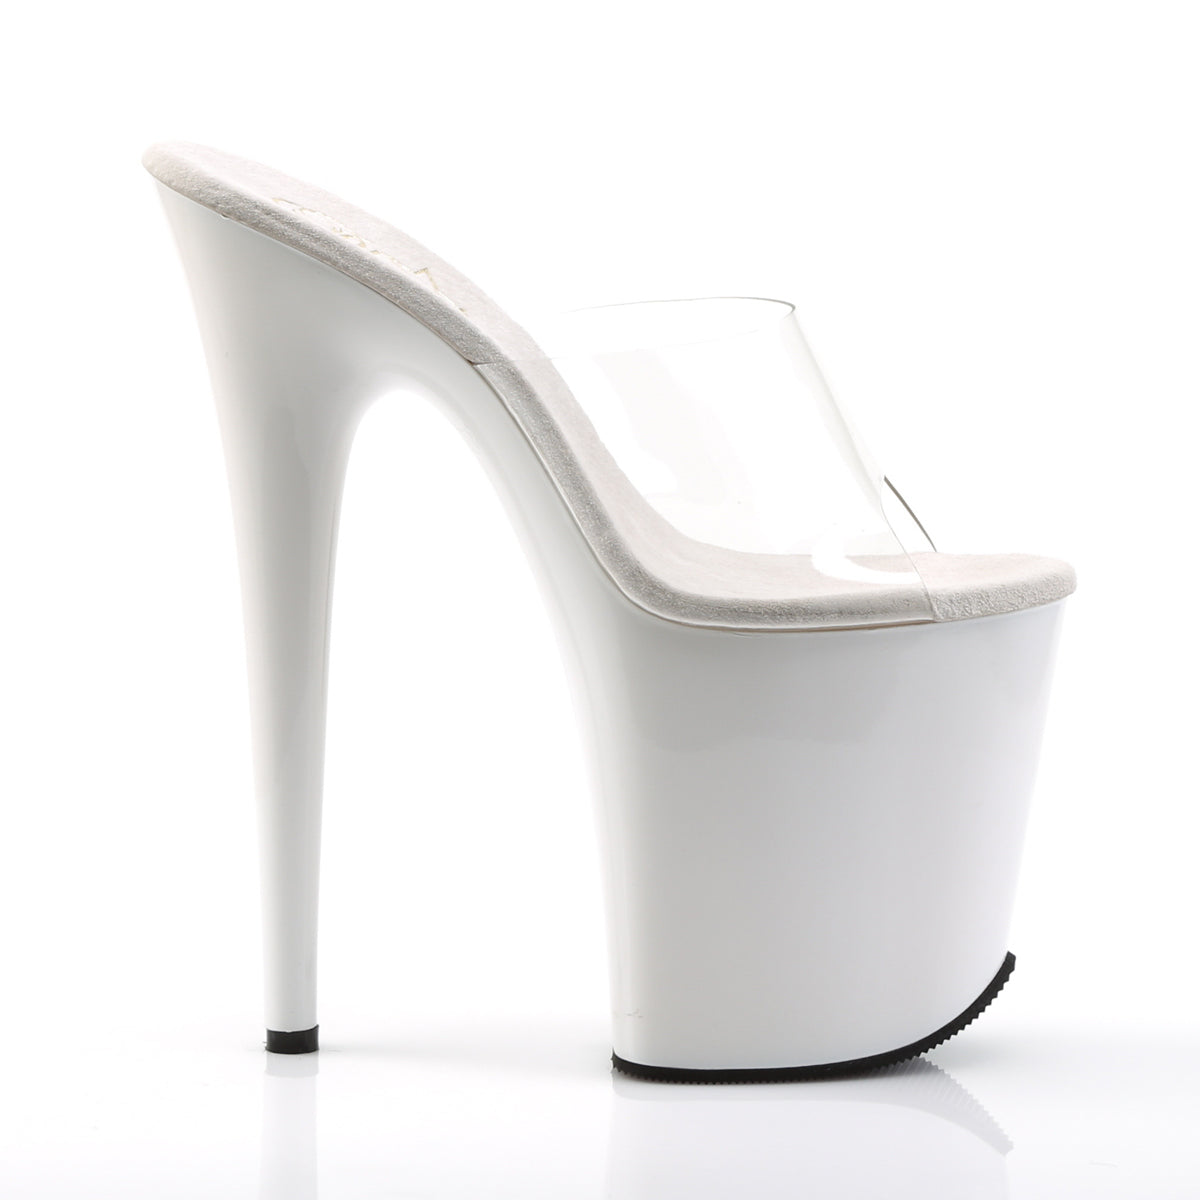 FLAMINGO-801 8" Heel Clear and White Pole Dancing Platforms-Pleaser- Sexy Shoes Fetish Heels